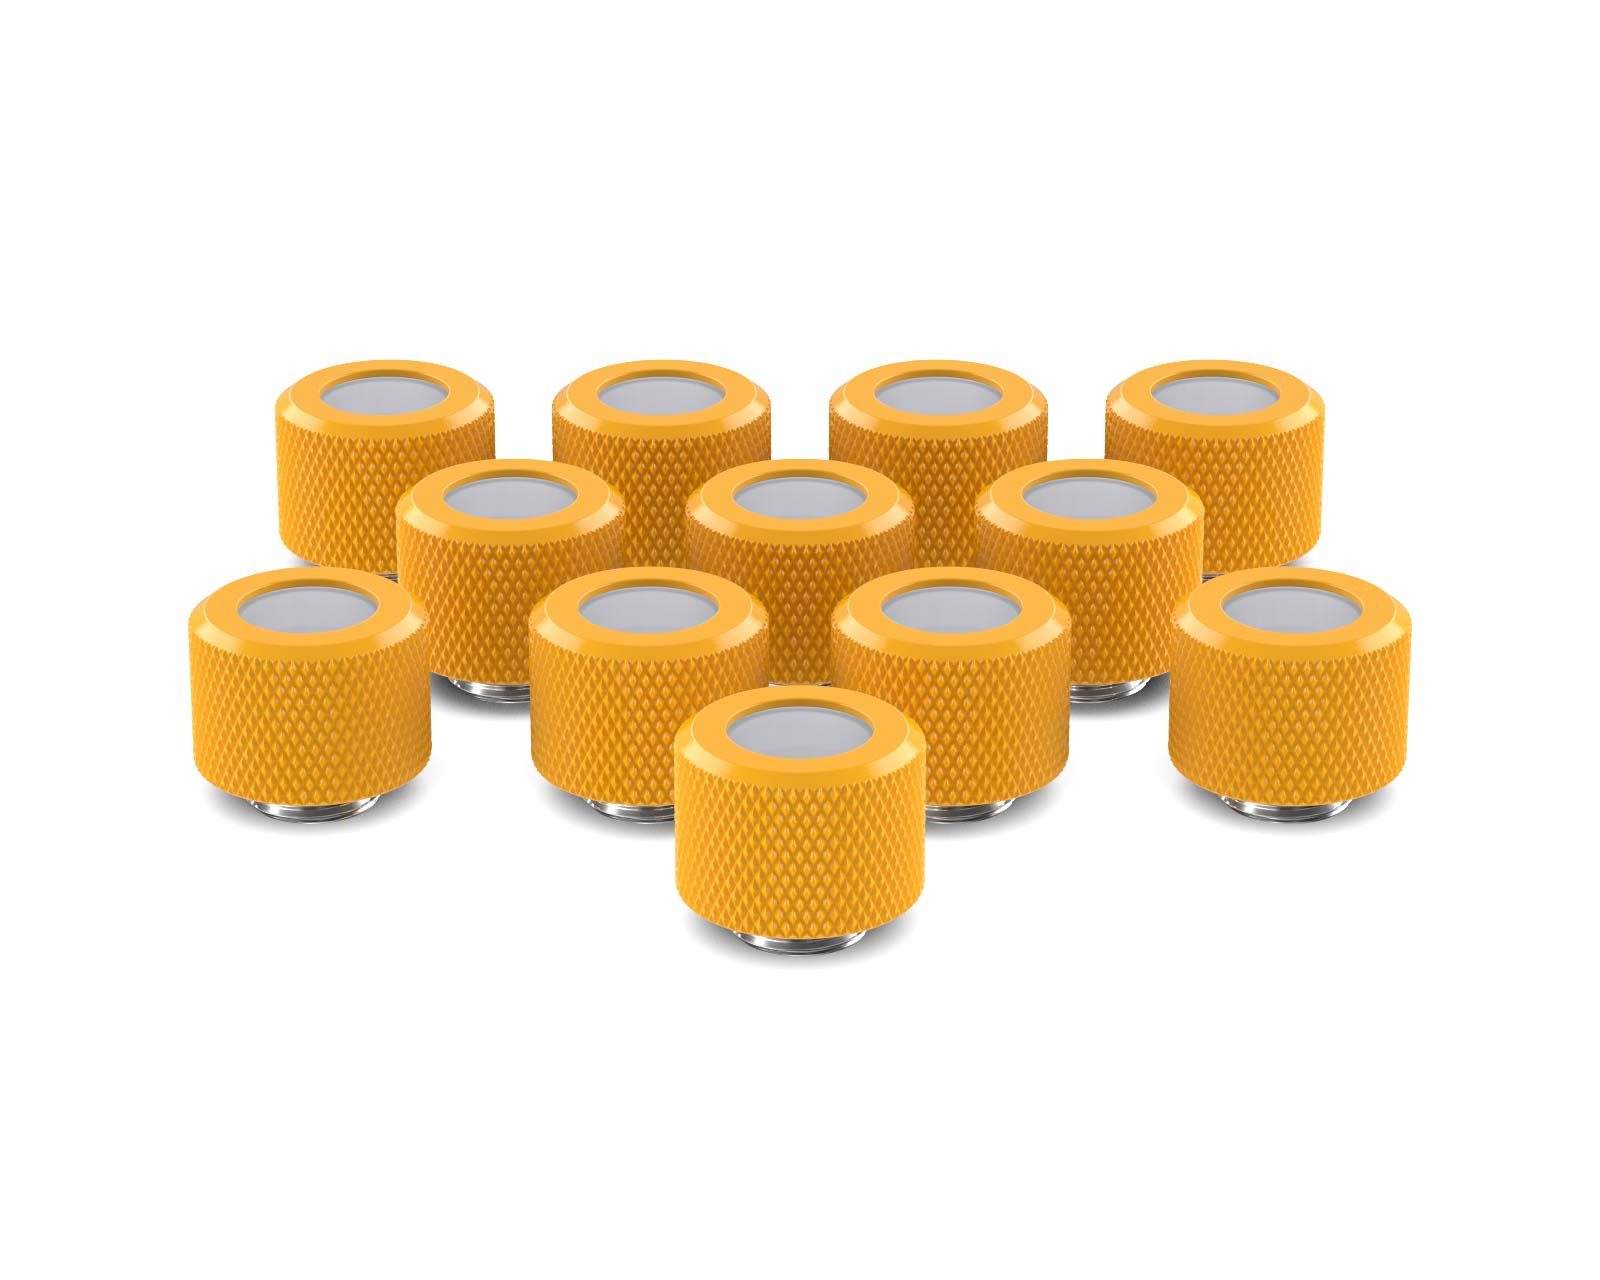 PrimoChill 12mm OD Rigid SX Fitting - 12 Pack - PrimoChill - KEEPING IT COOL Yellow